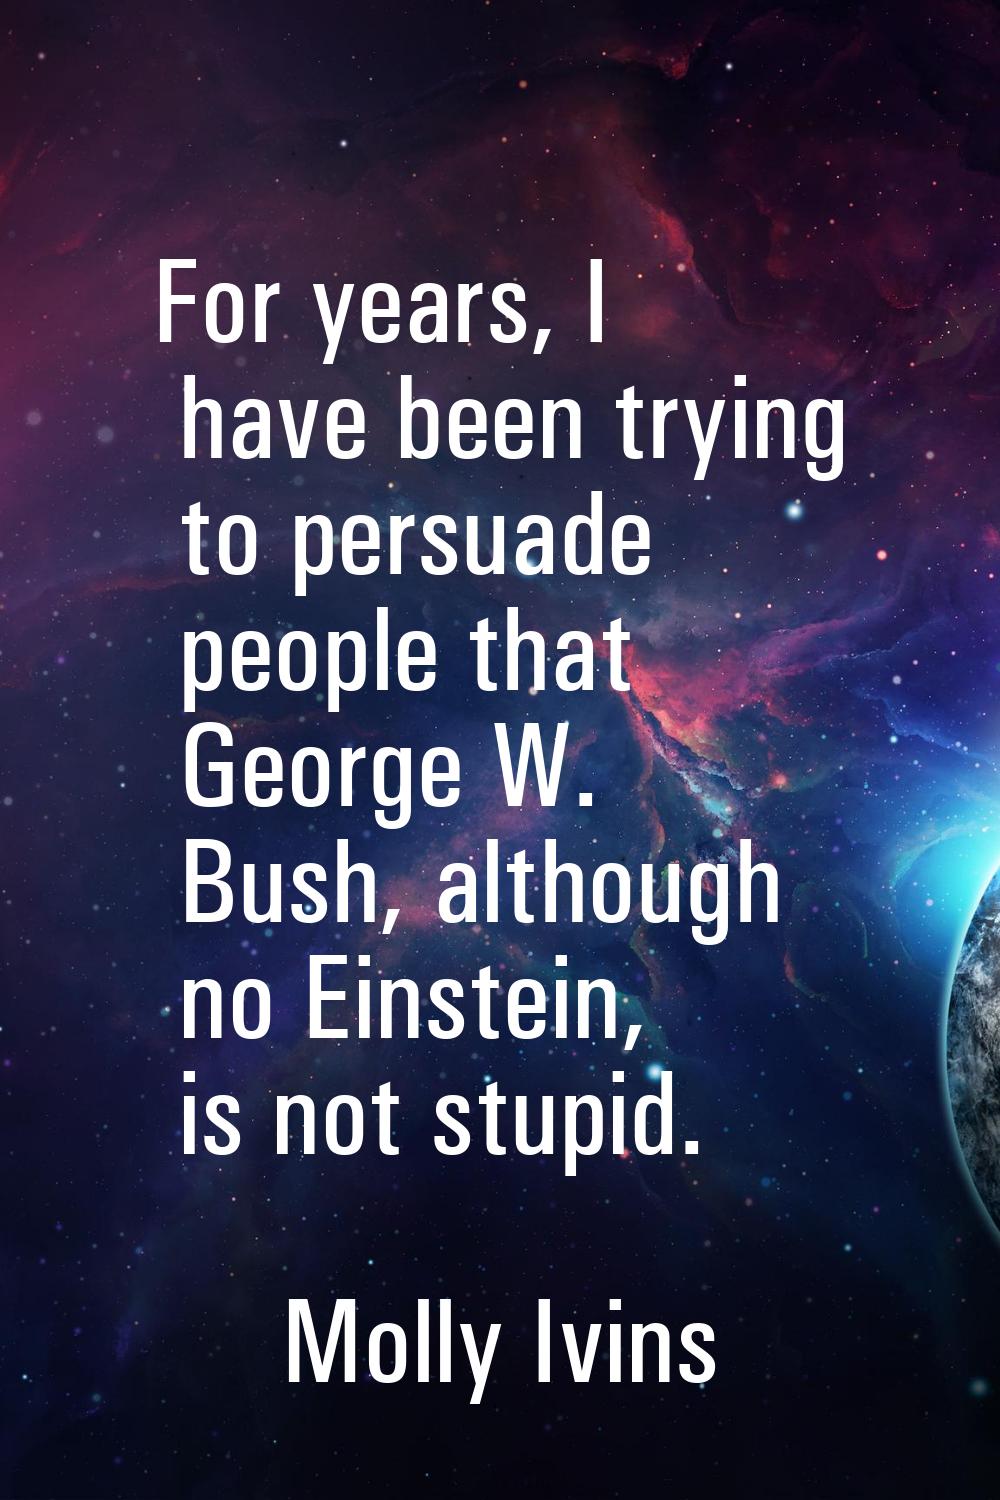 For years, I have been trying to persuade people that George W. Bush, although no Einstein, is not 